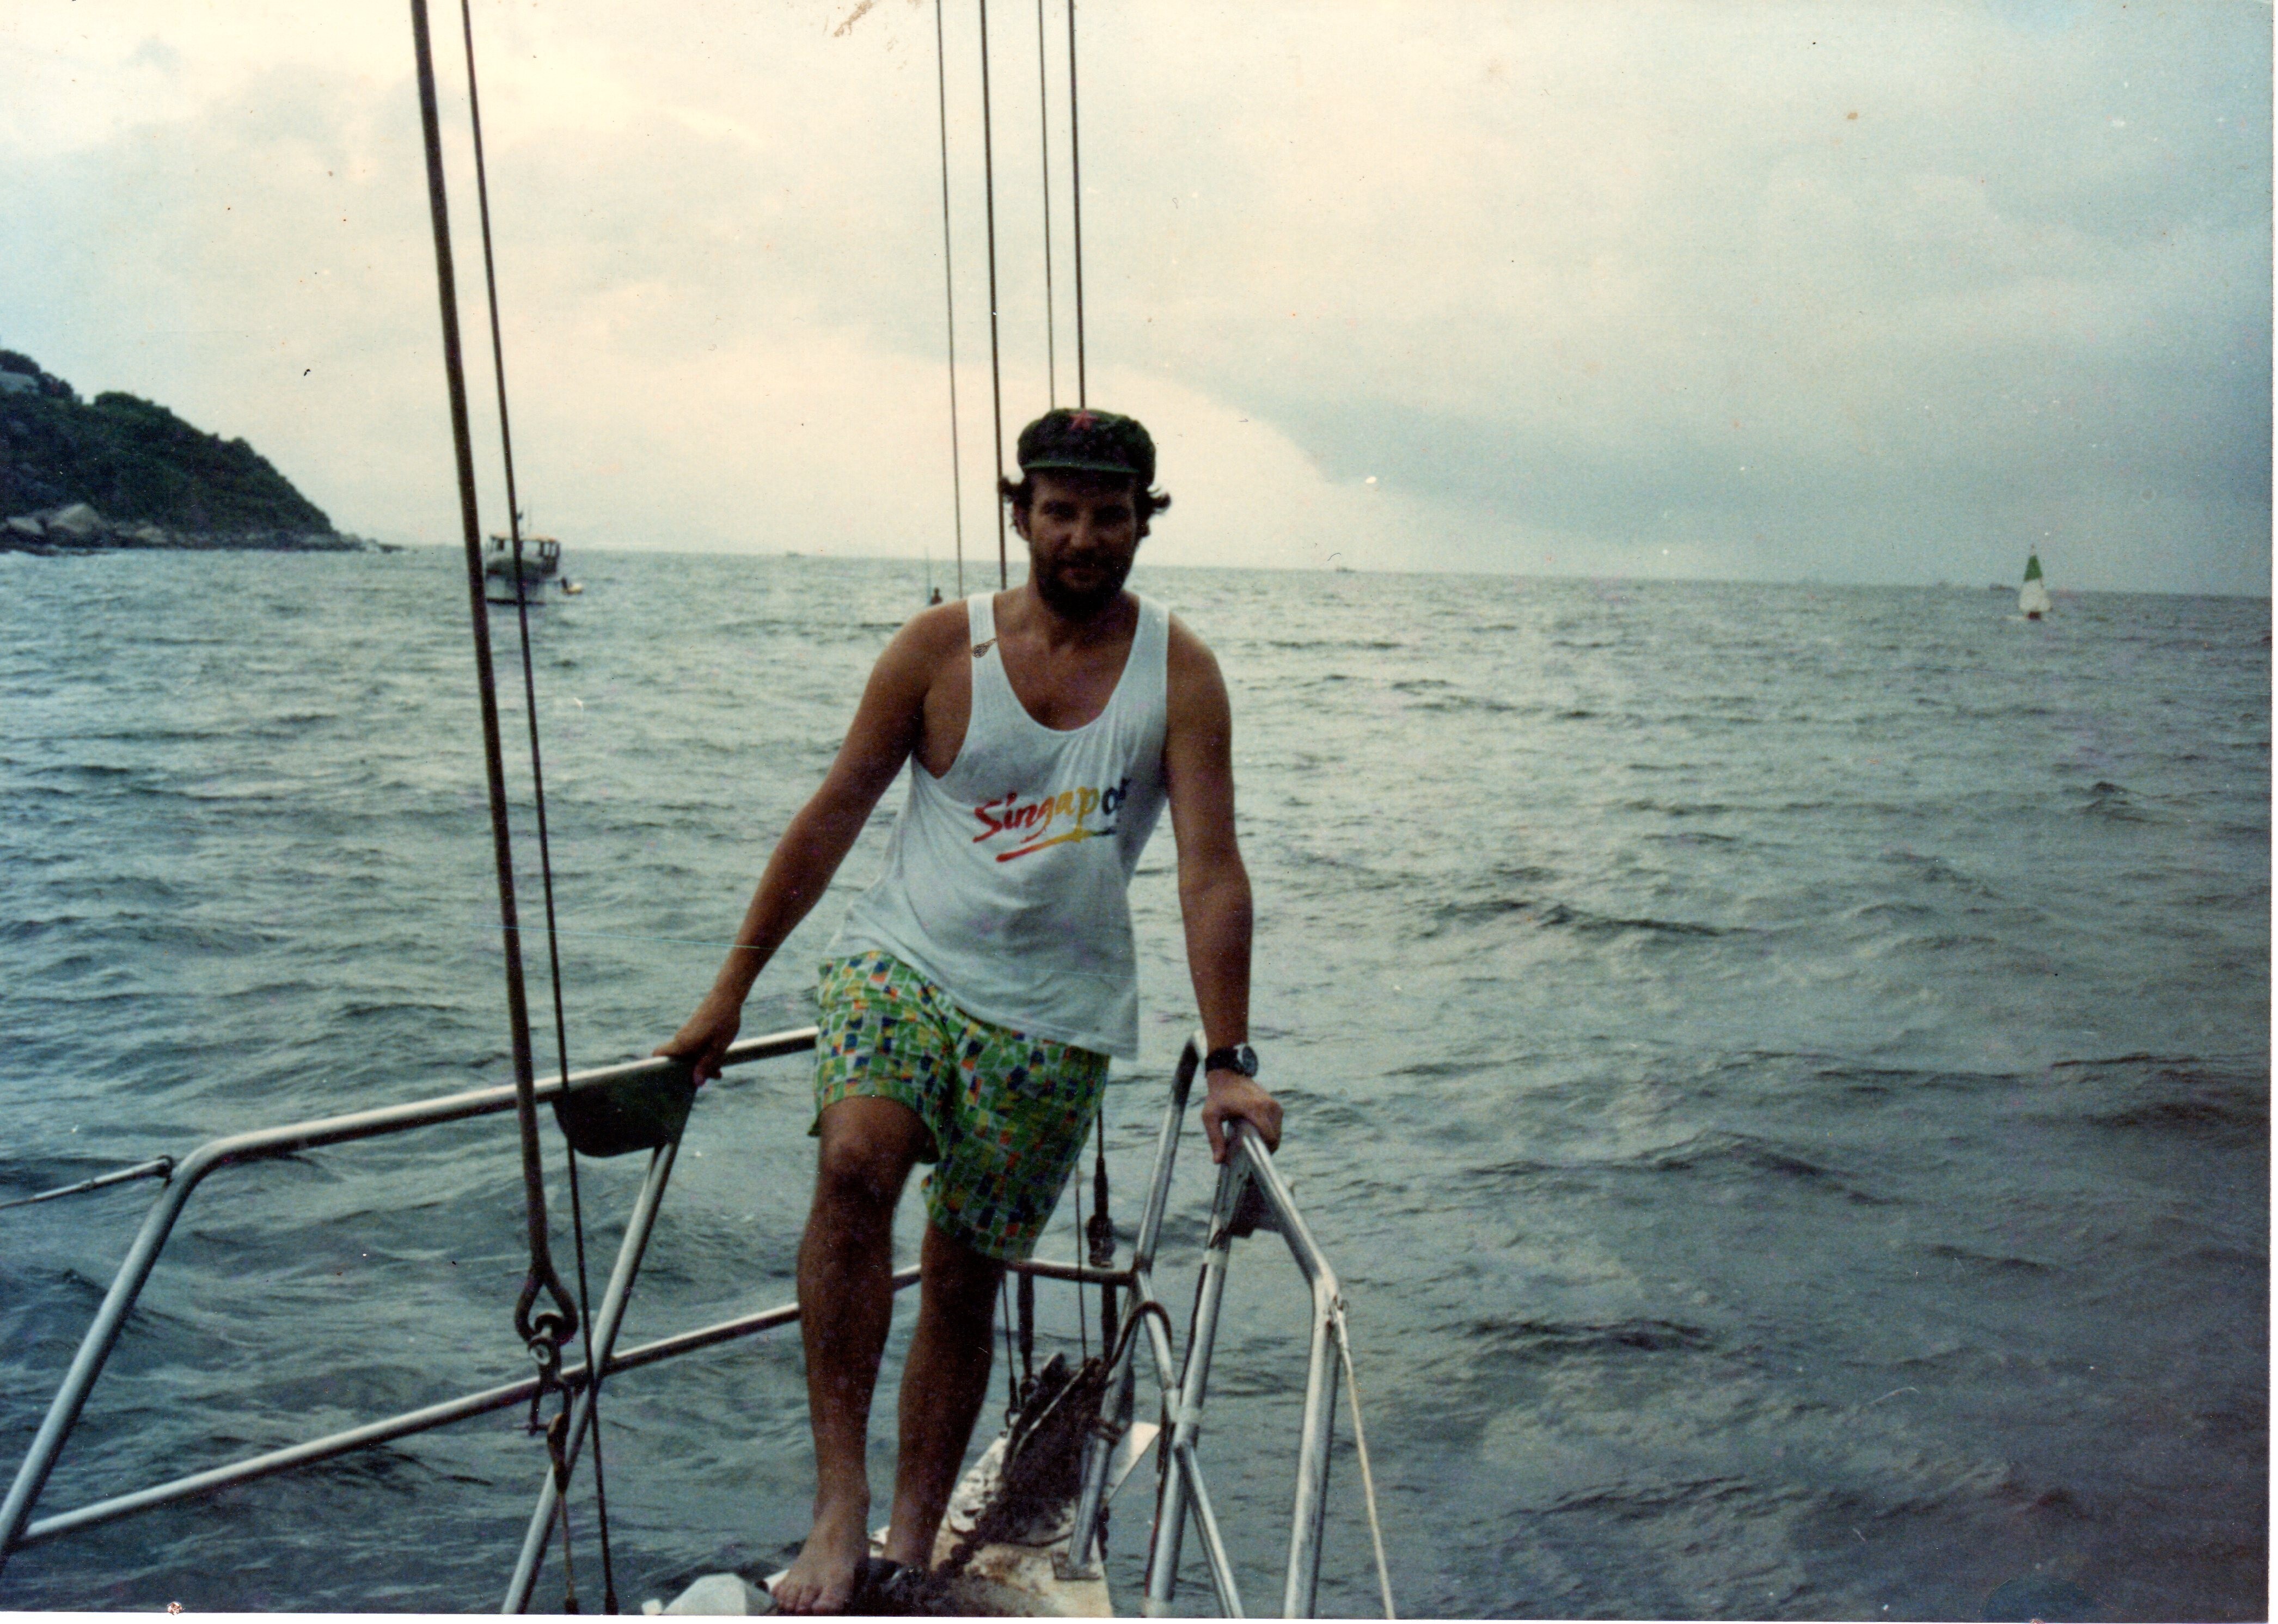 Then Chief Inspector Rod Mason aboard the Oui yacht as an undercover crew member in 1988 during a major international drugs operation in Hong Kong. Photo: Courtesy of Rod Mason